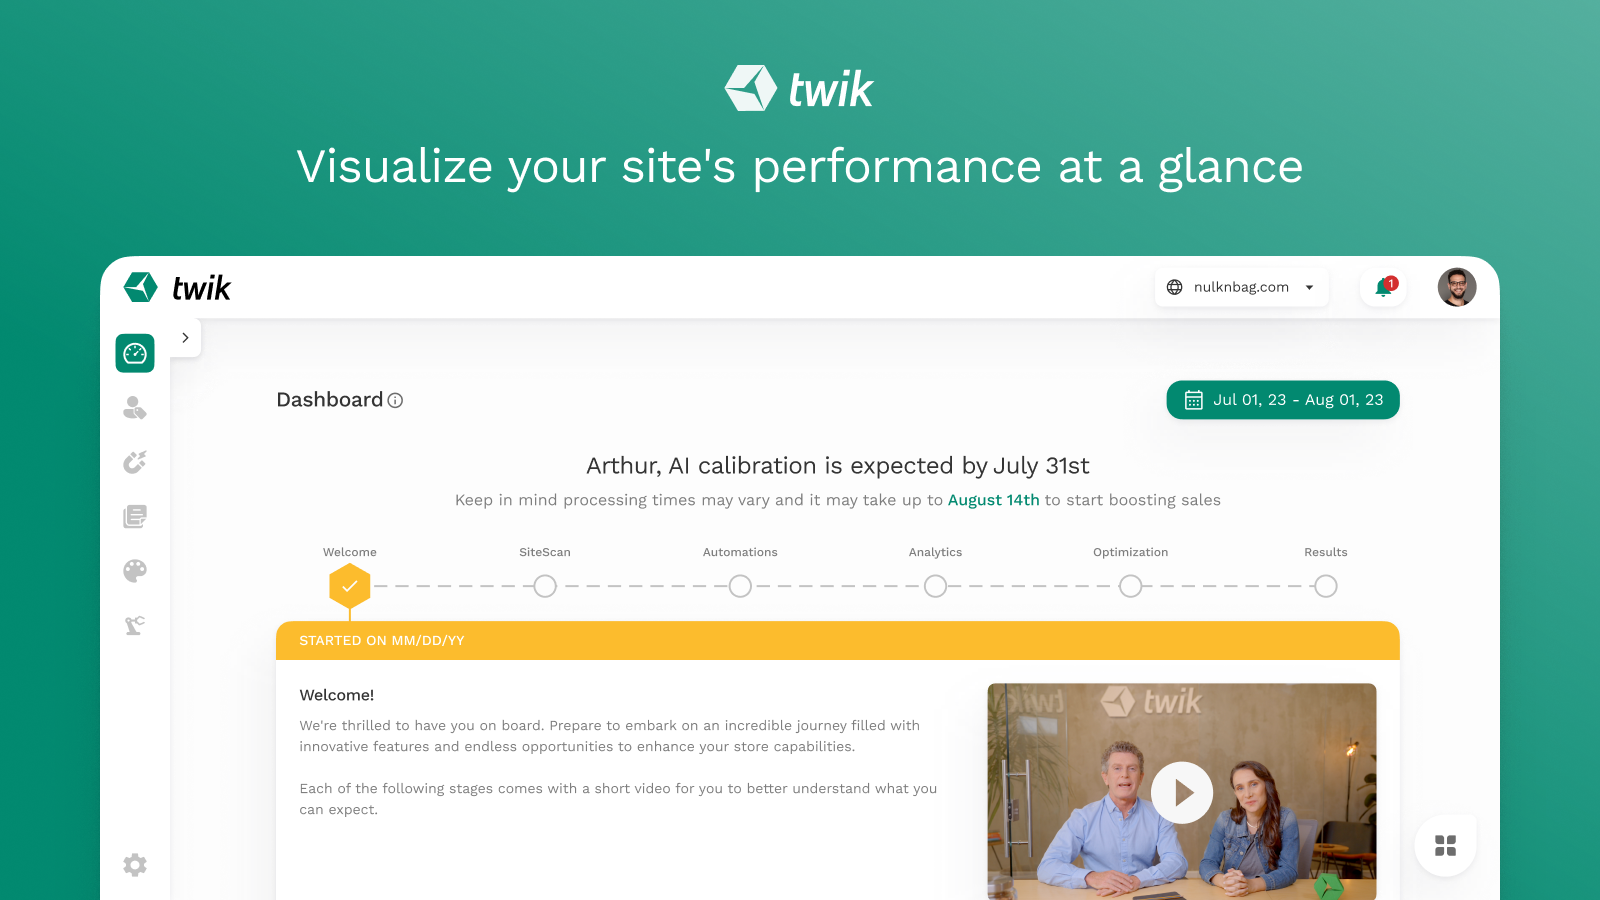 Visualize your site's performance at a glance